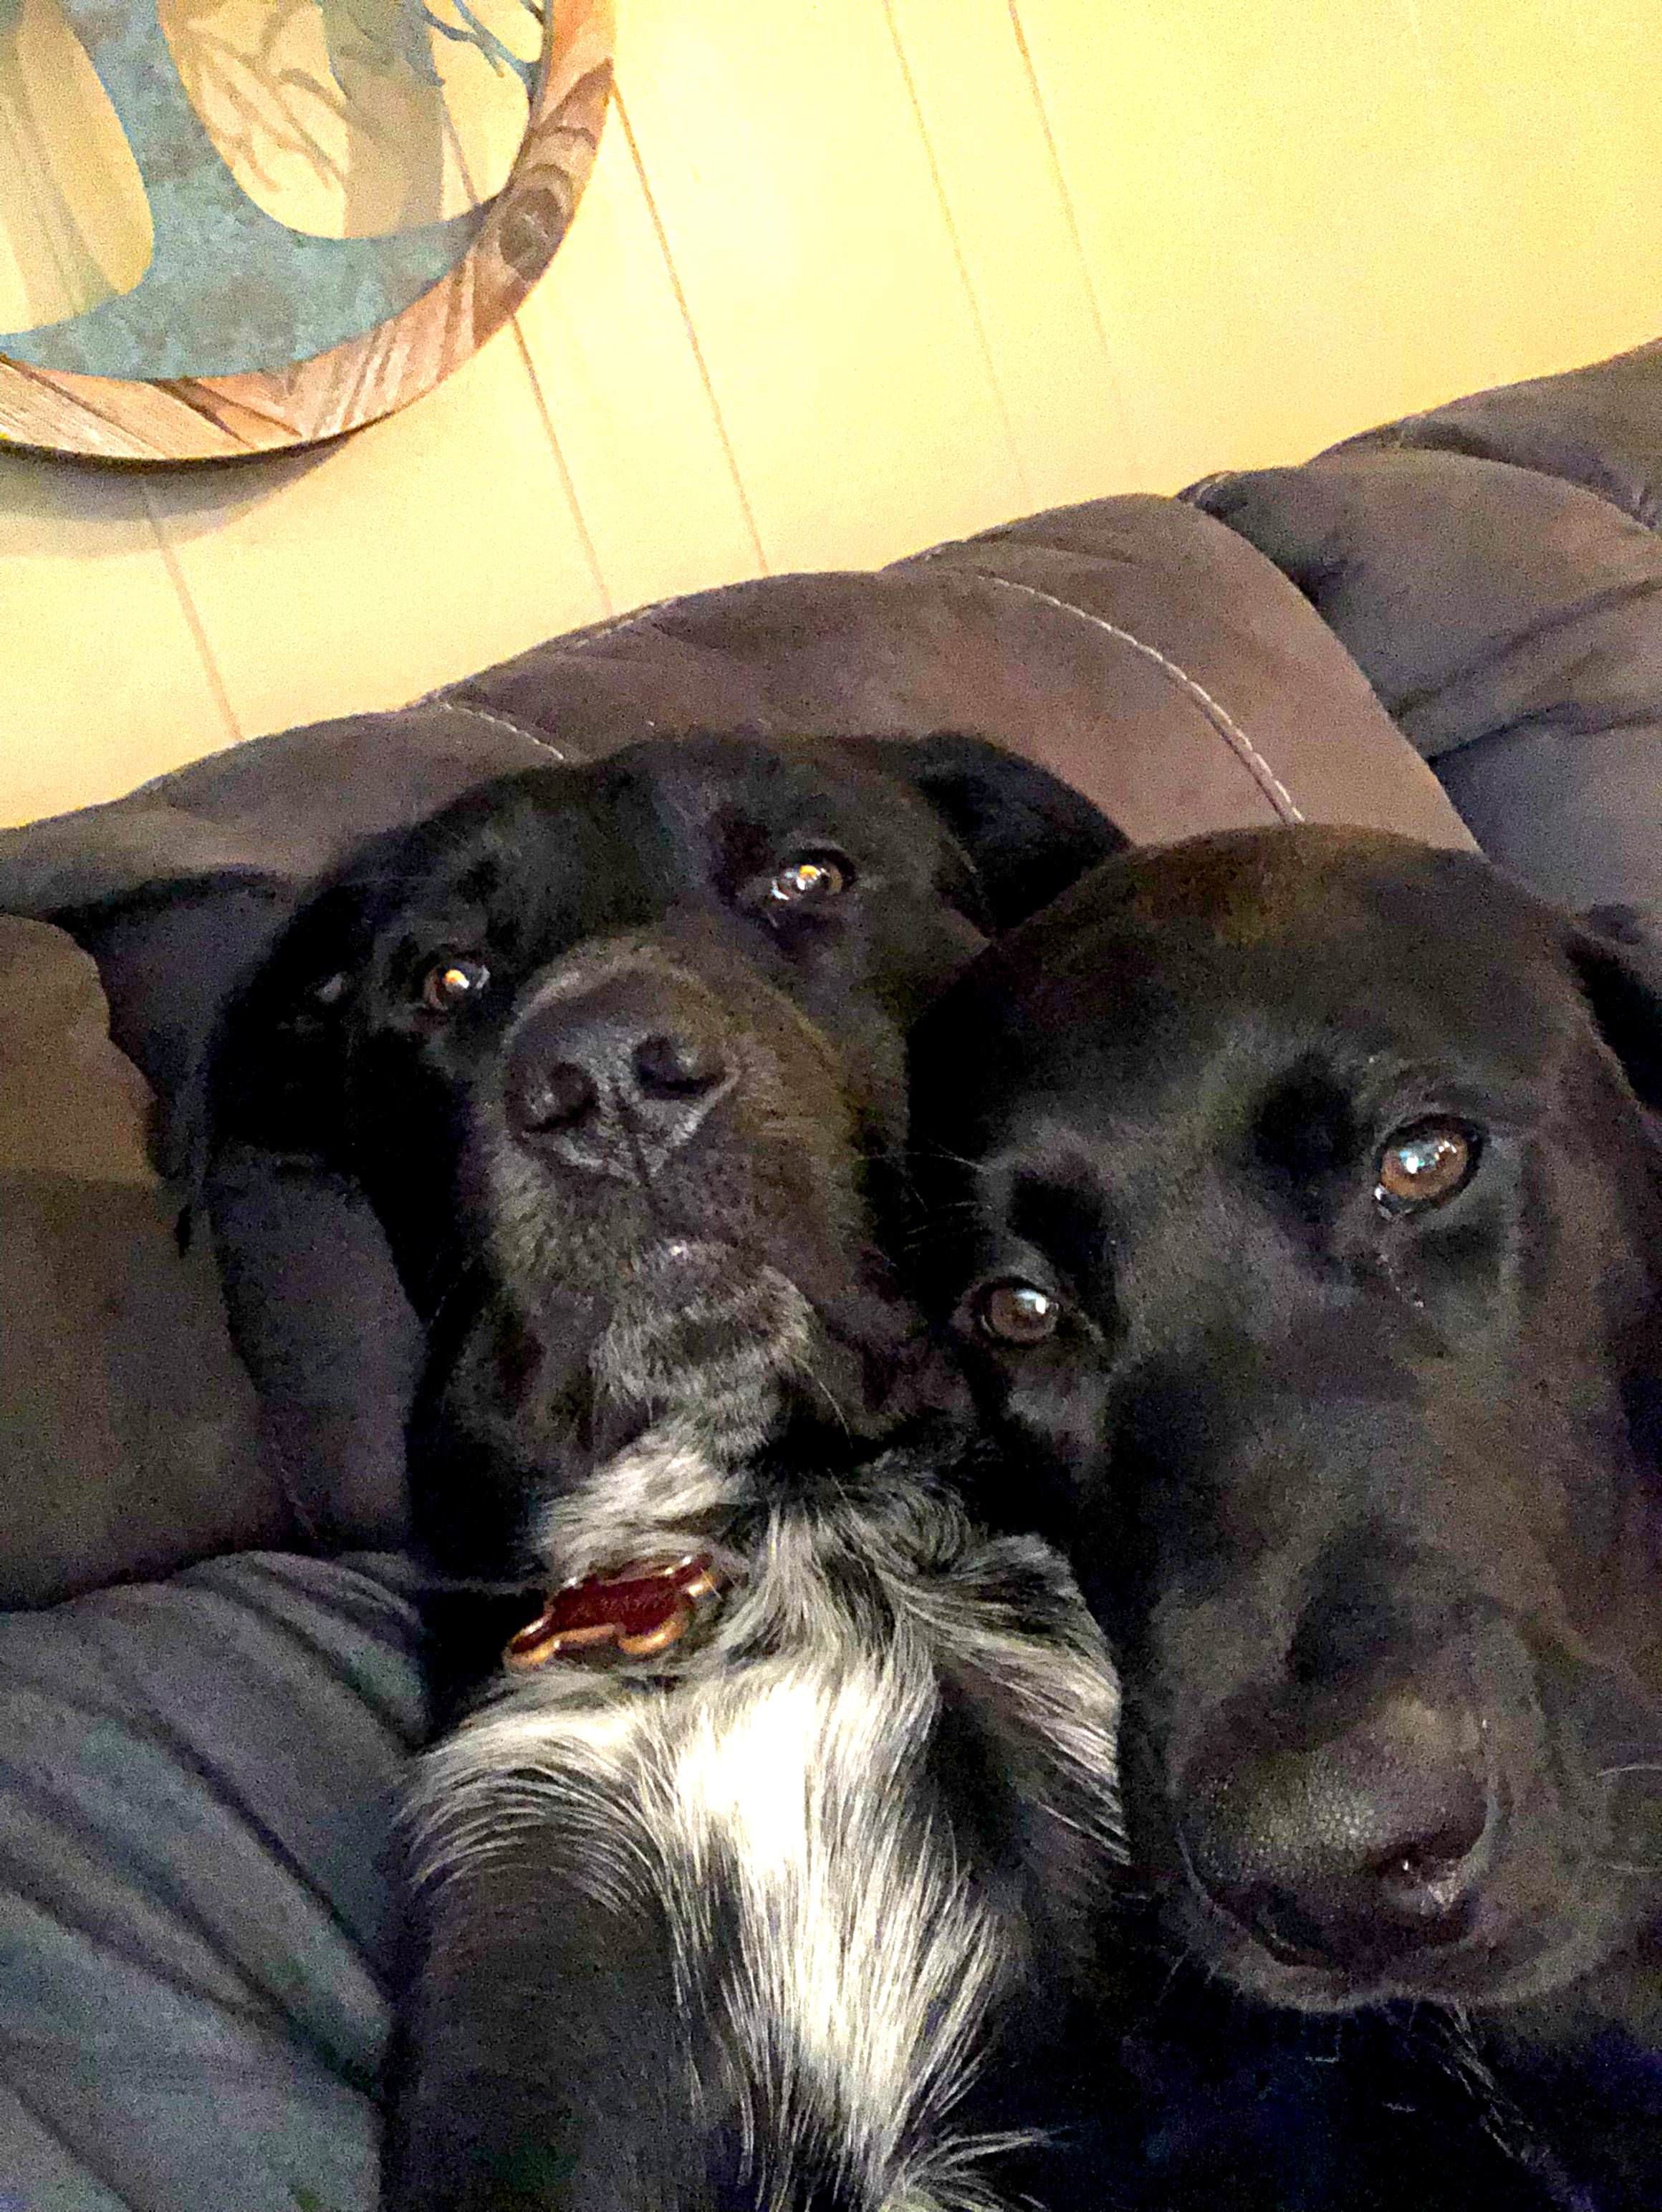 I was told they look like an old couple trying to take a selfie.